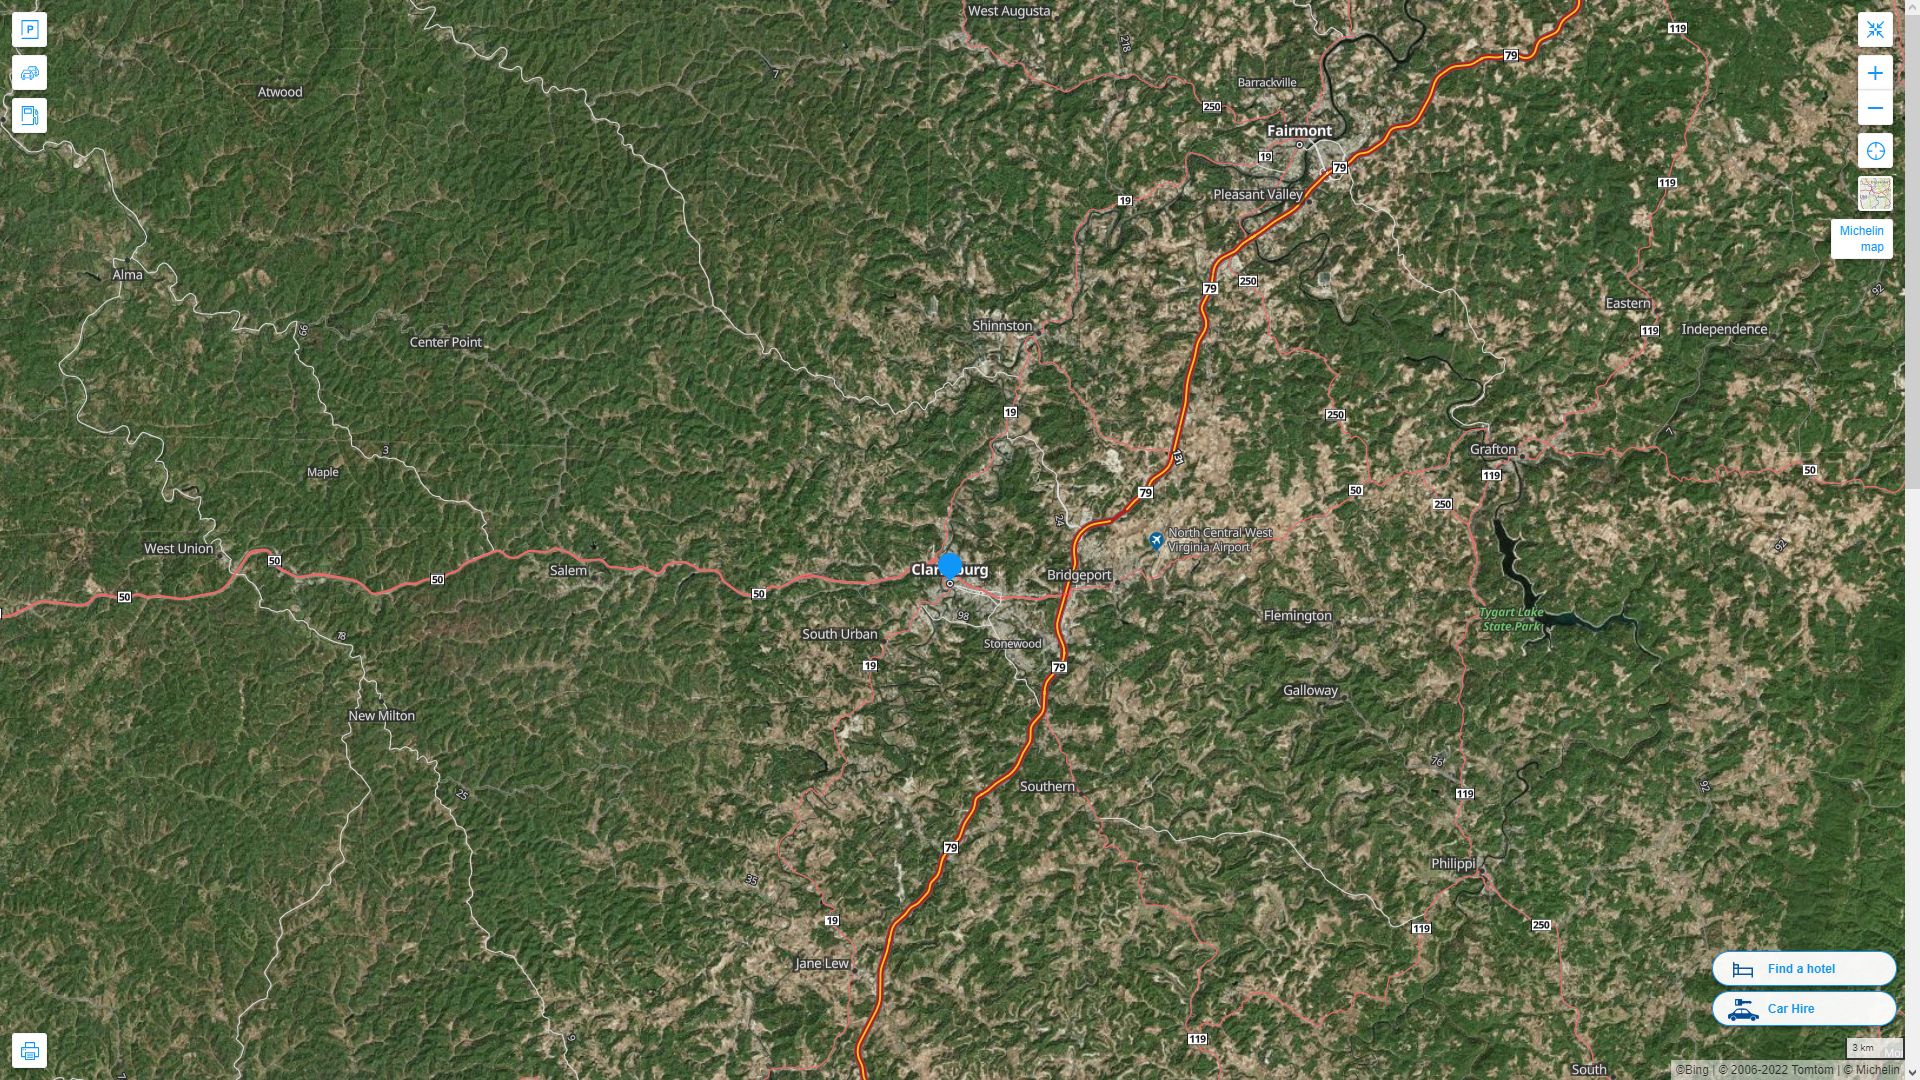 Clarksburg West Virginia Highway and Road Map with Satellite View